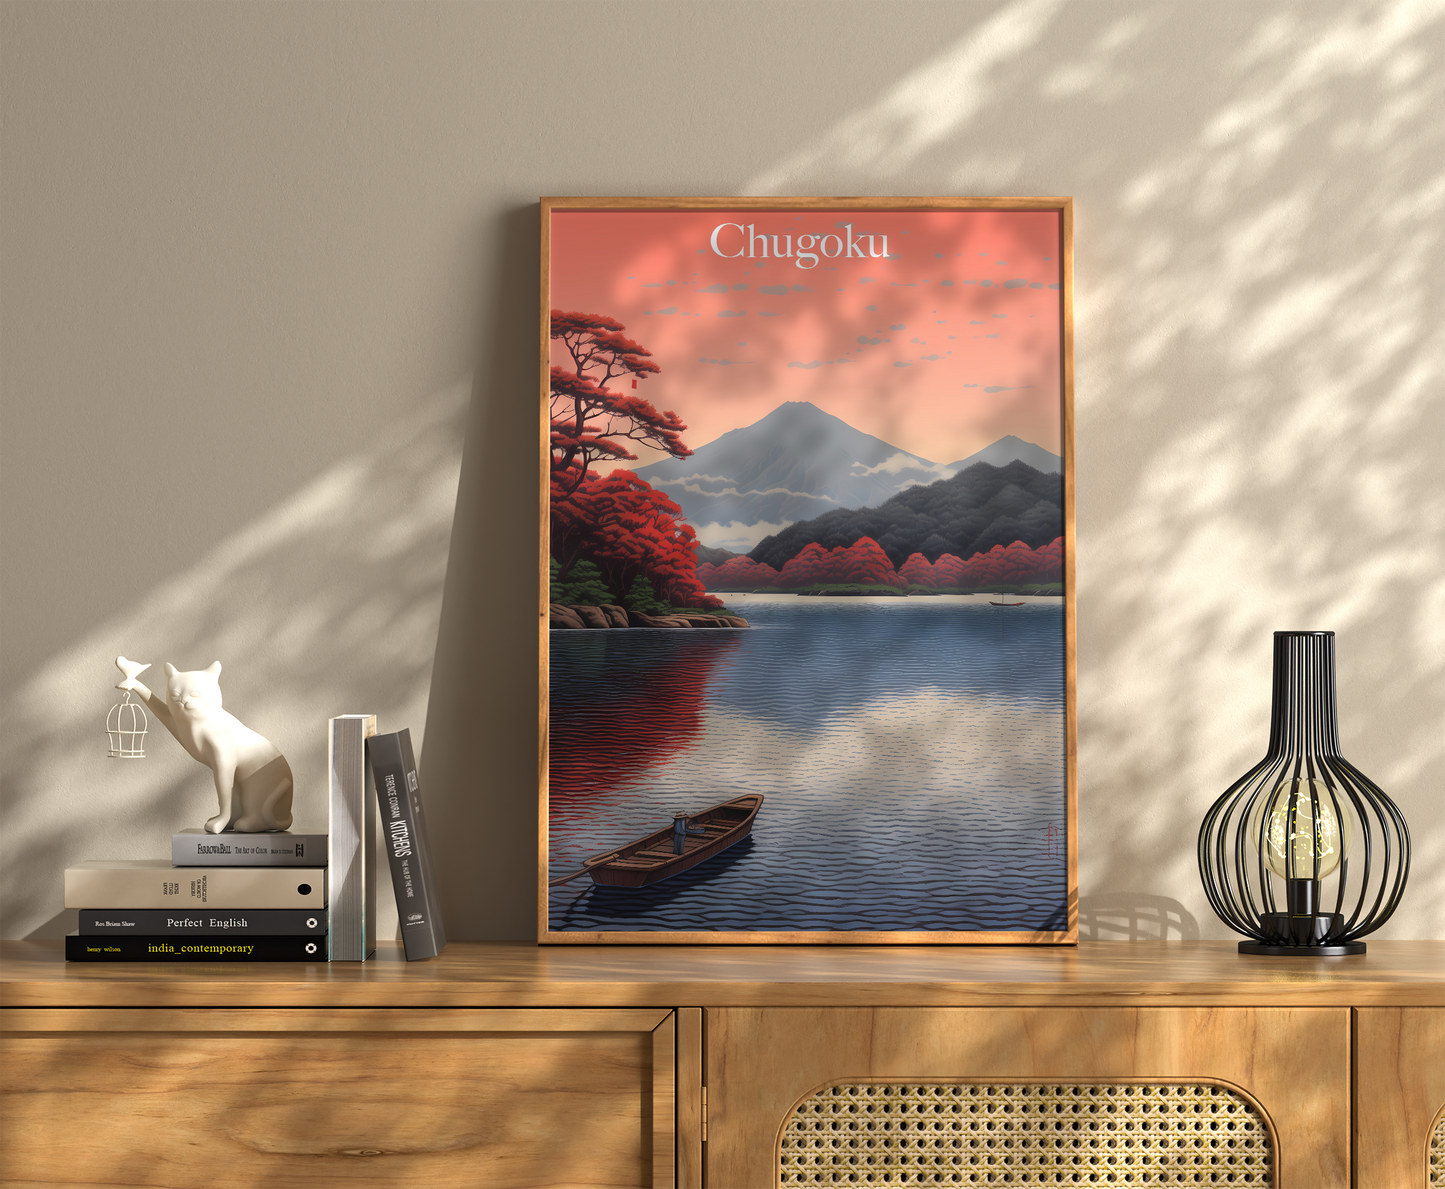 A framed travel poster of Chugoku with a serene lake scene, flanked by books and decorative items.